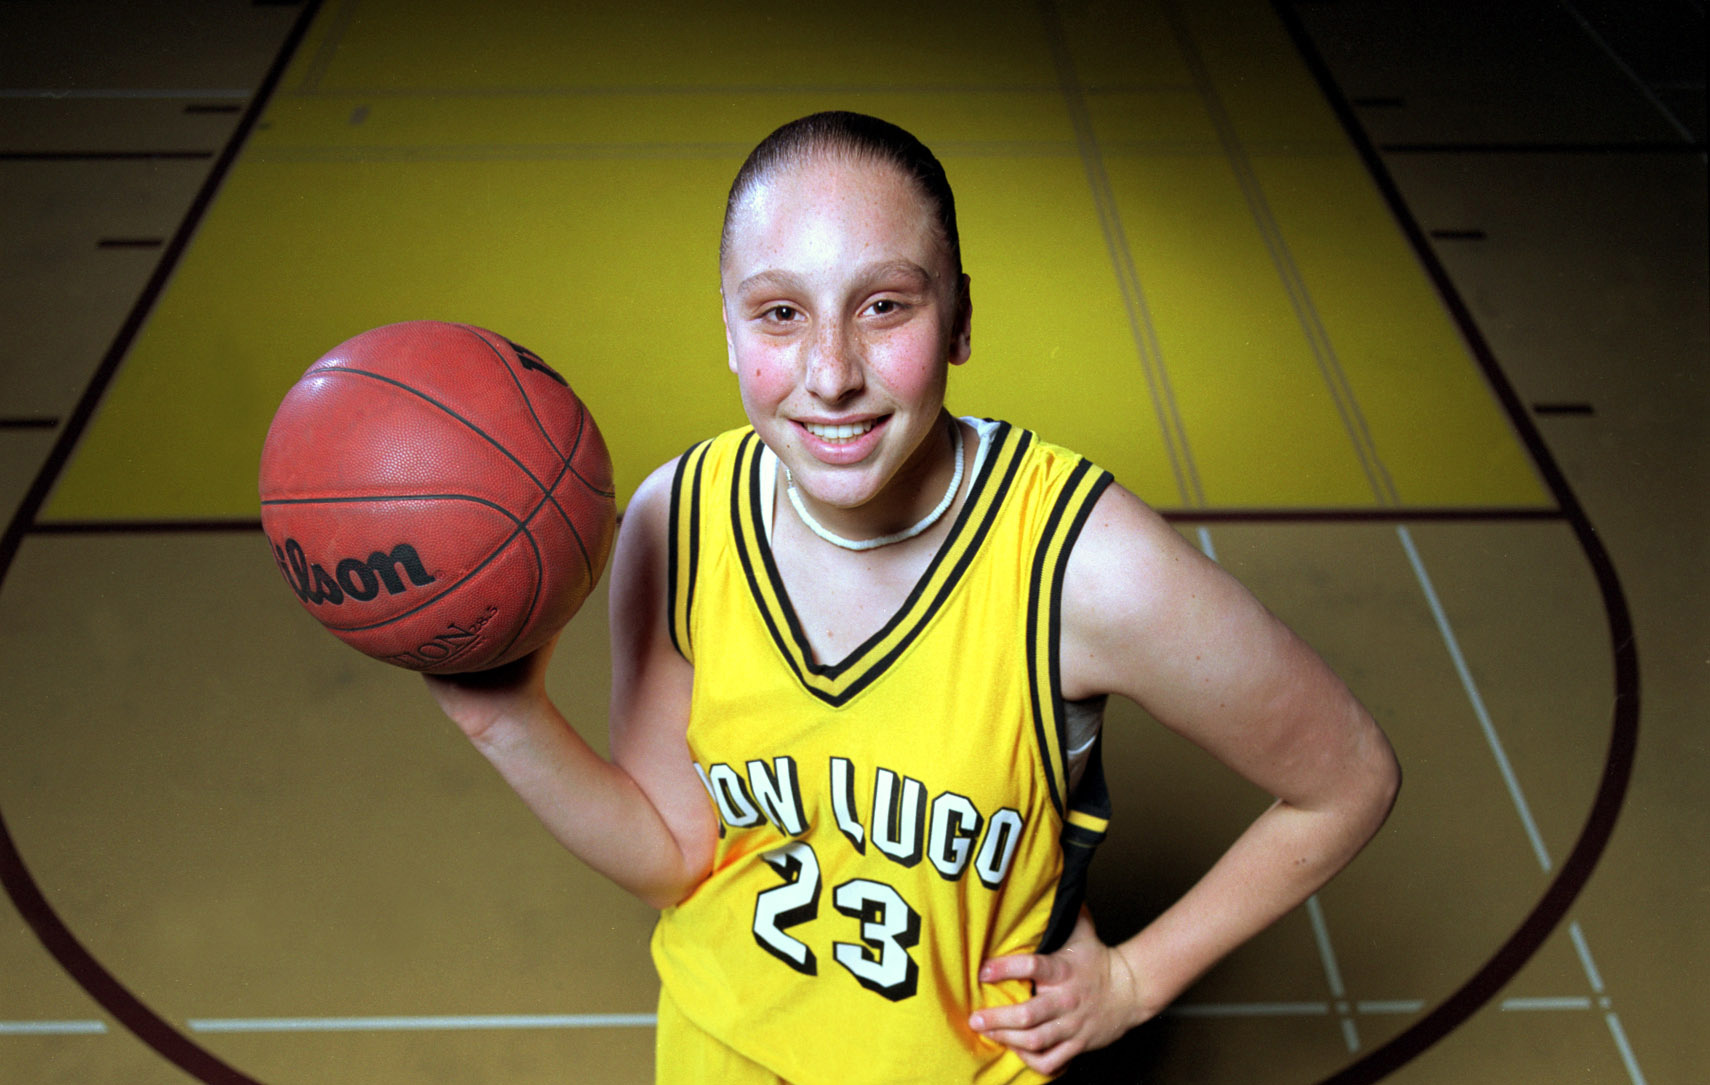 Girls Sports Month: A look back at Diana Taurasi in high school | USA TODAY High School Sports